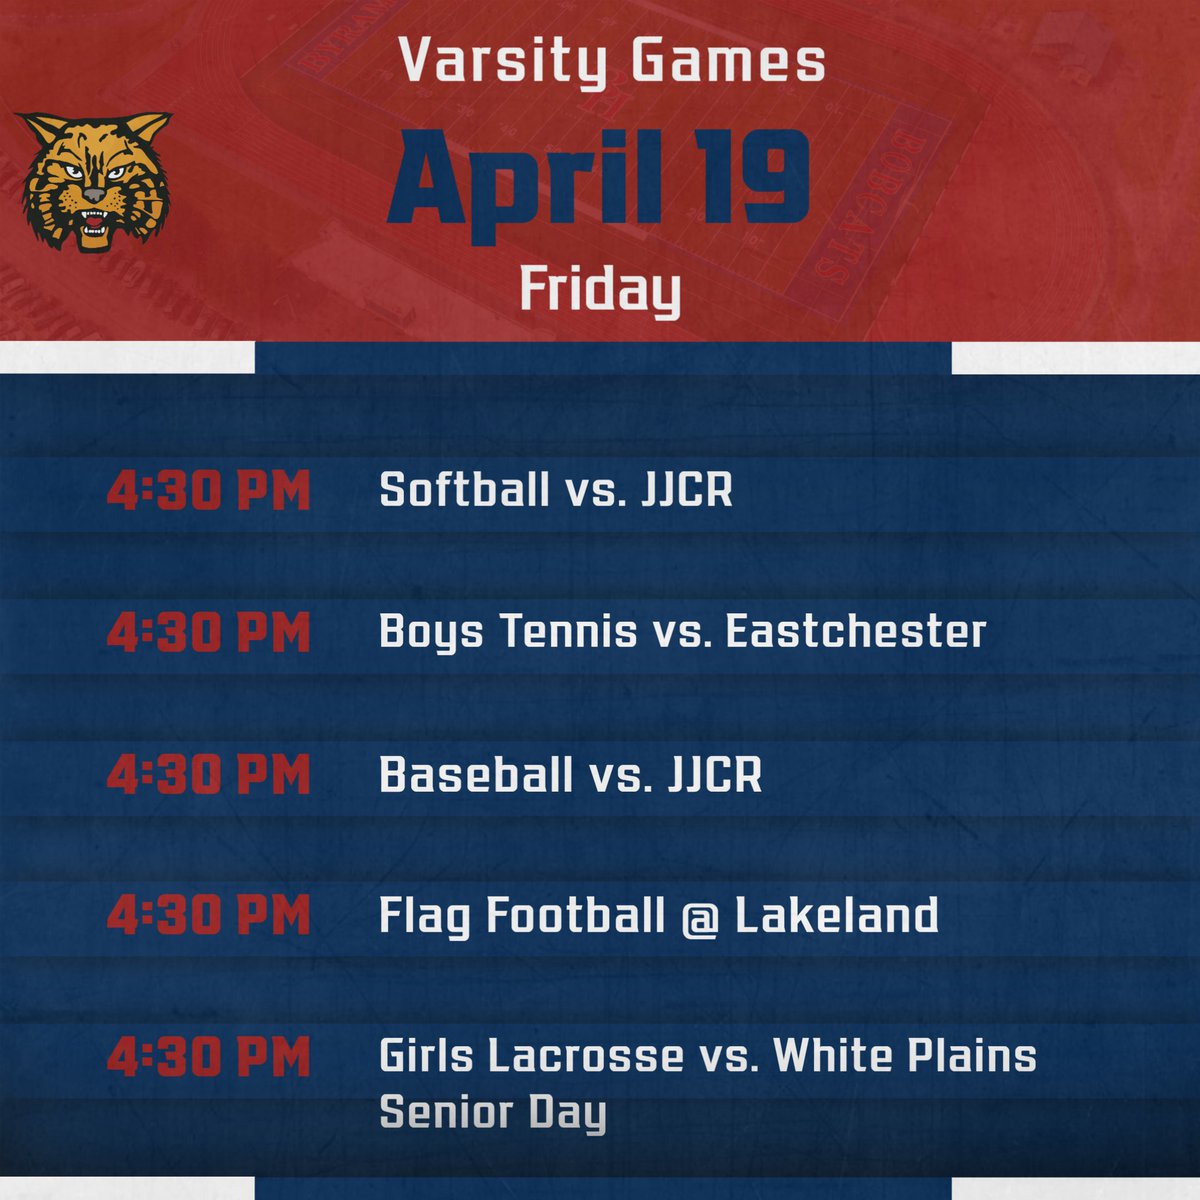 It is a busy day for the Bobcats! Come out and support our teams competing today!